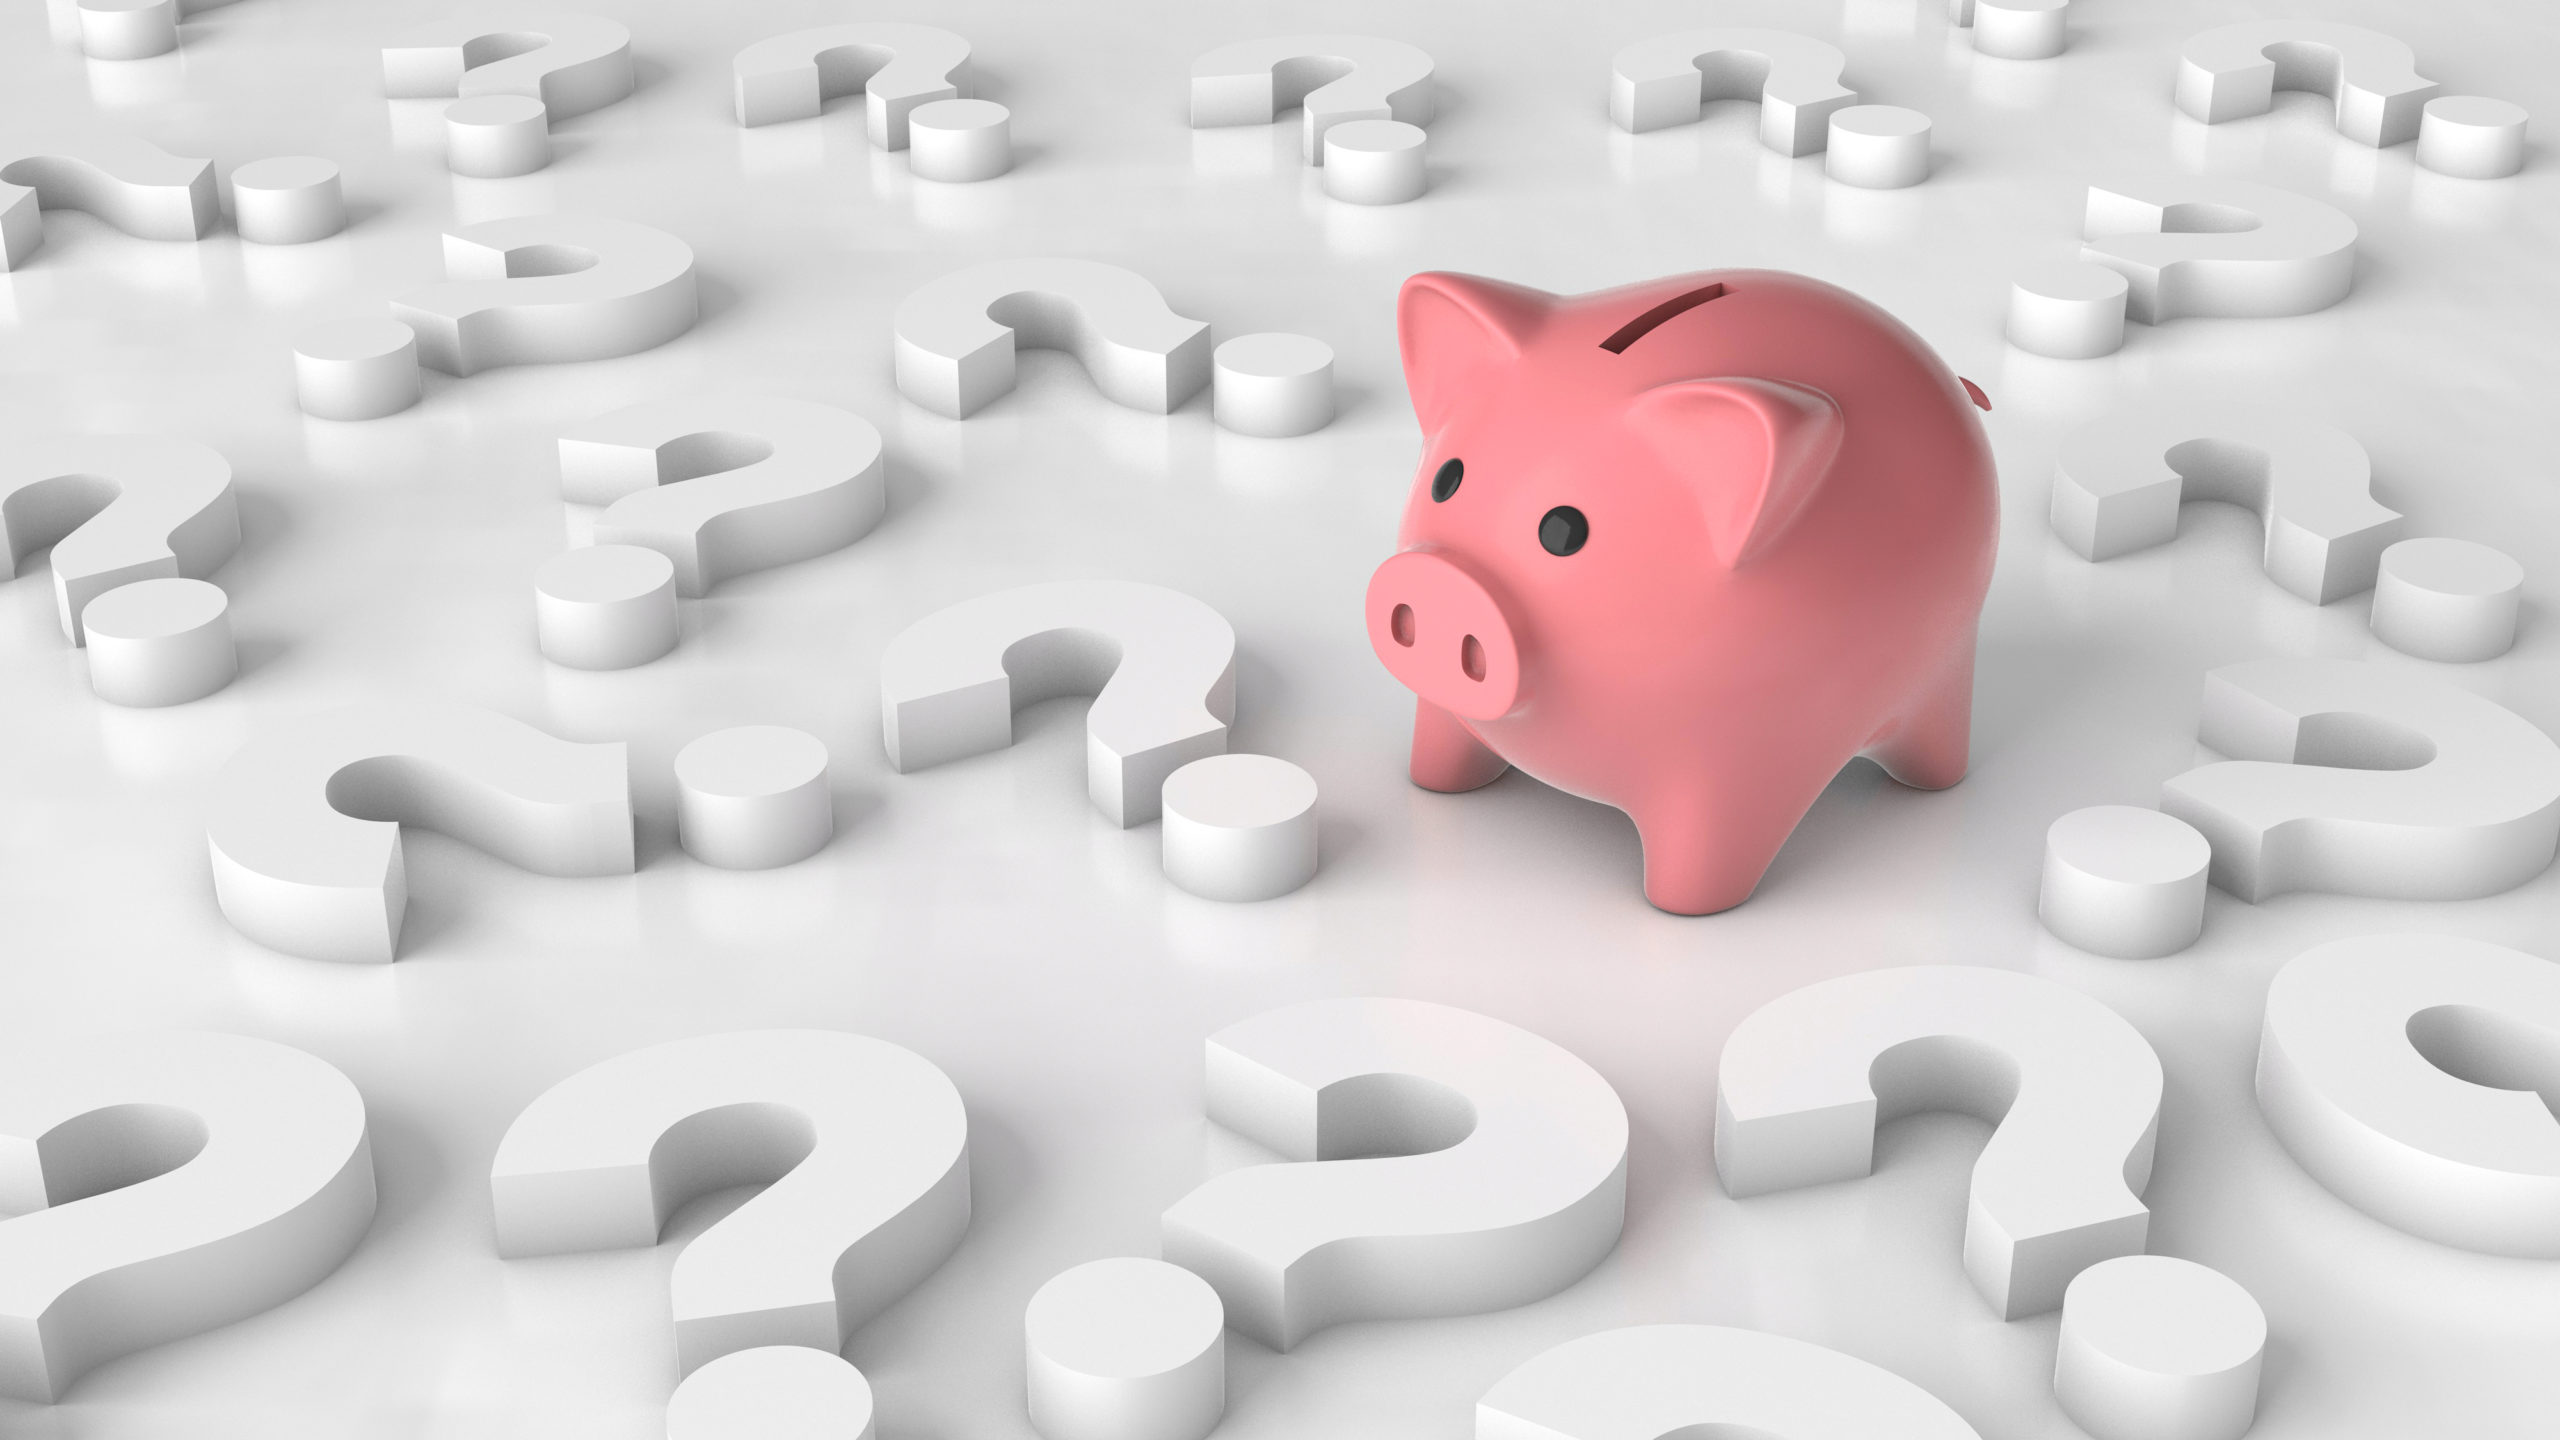 Image of pink piggy bank on a floor of question marks